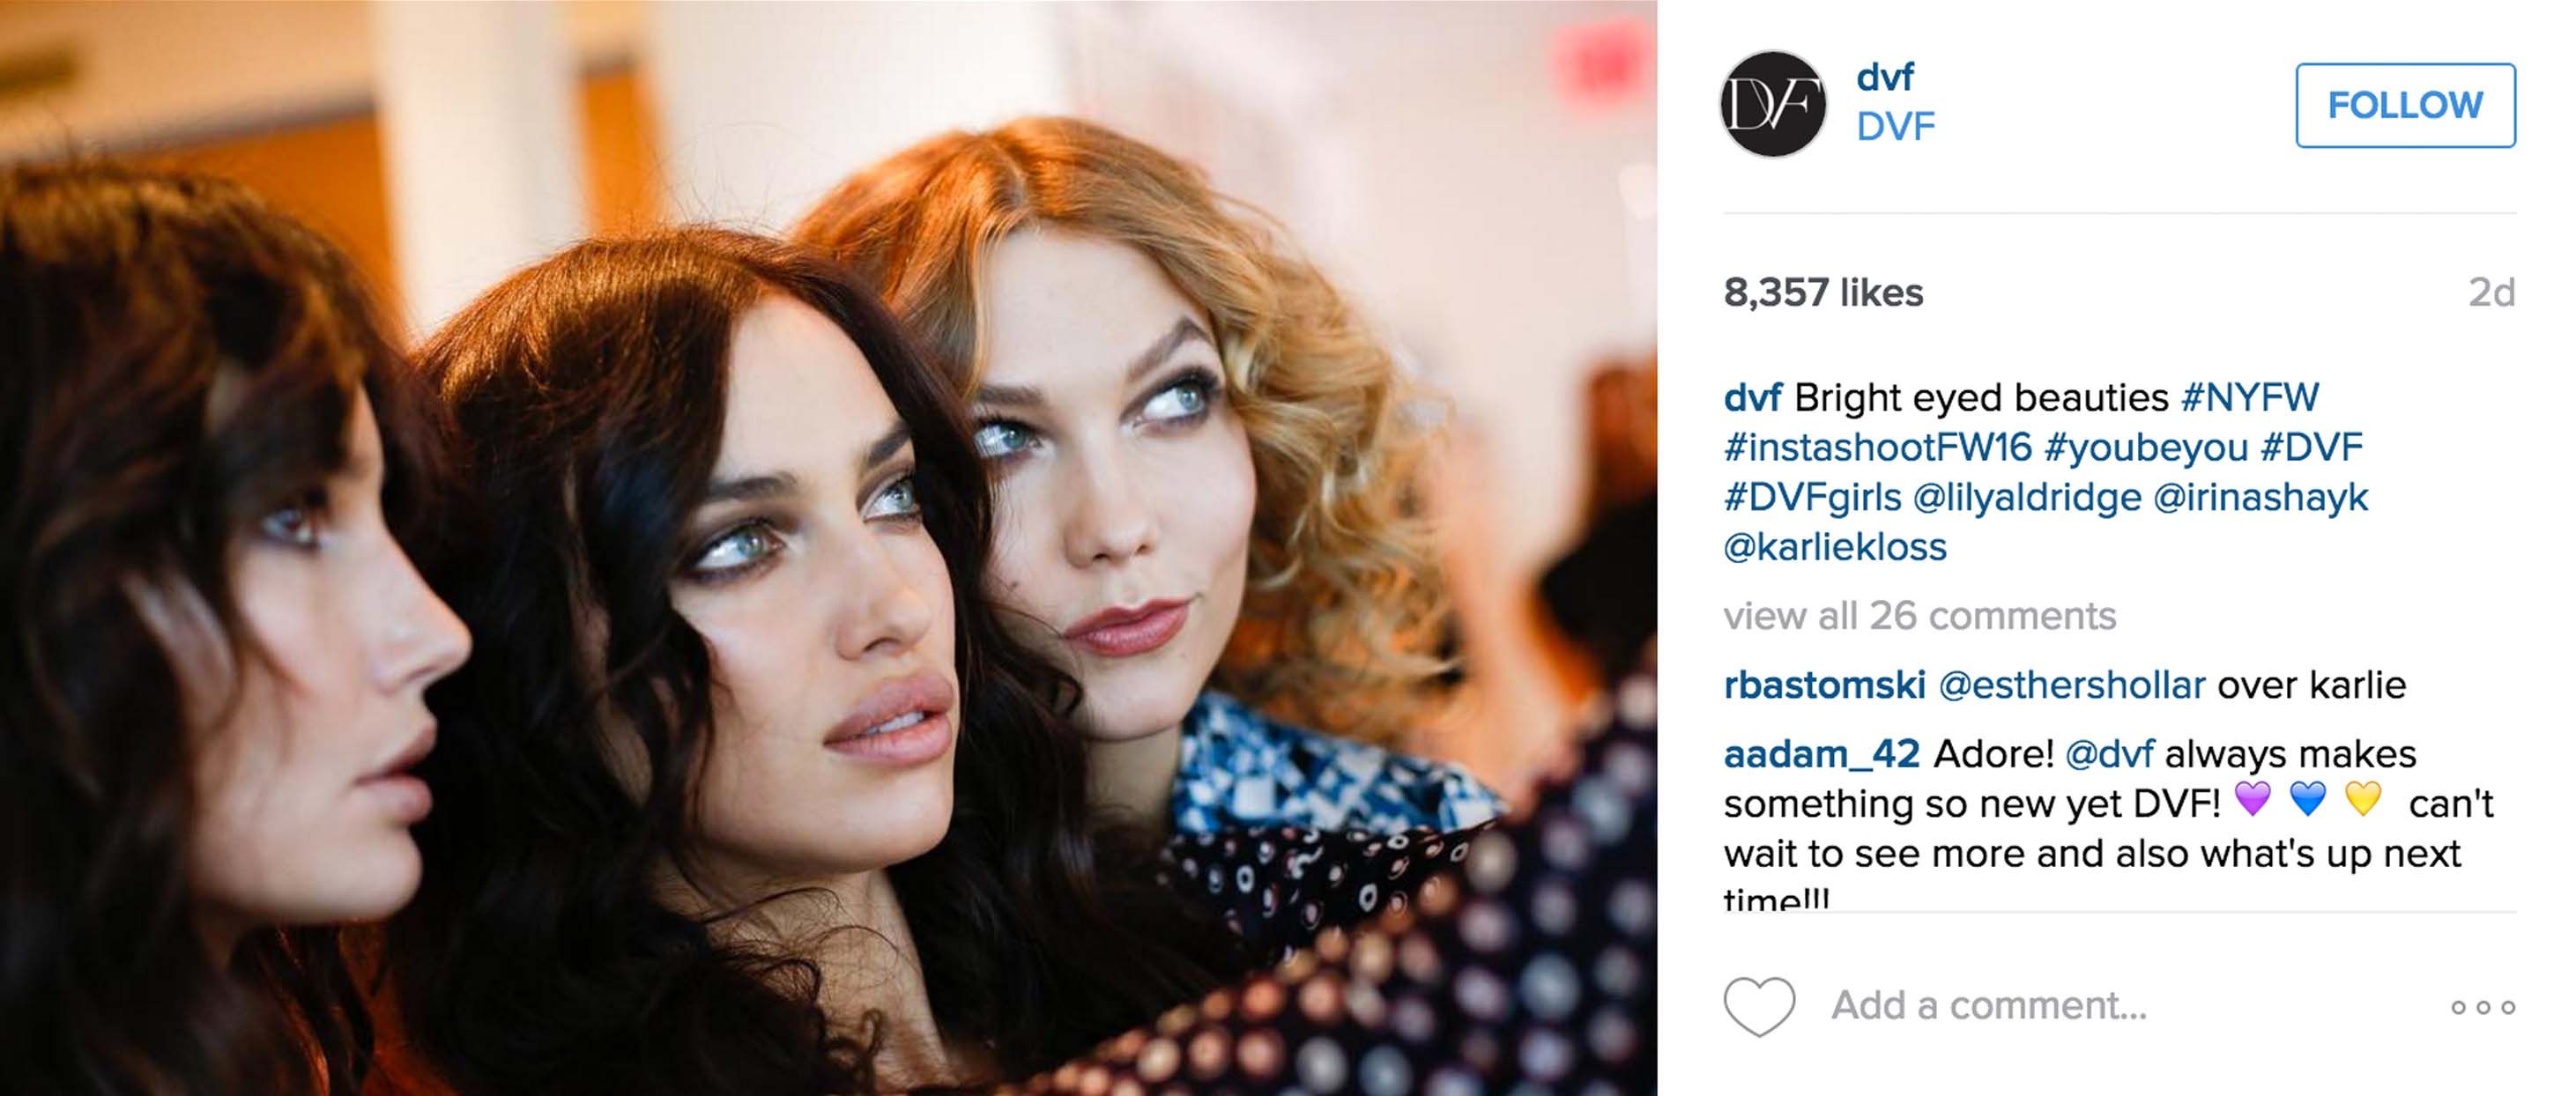 Let's take a peek, Valentine with DVF, which is welcomed with a very extraordinary and inspirational